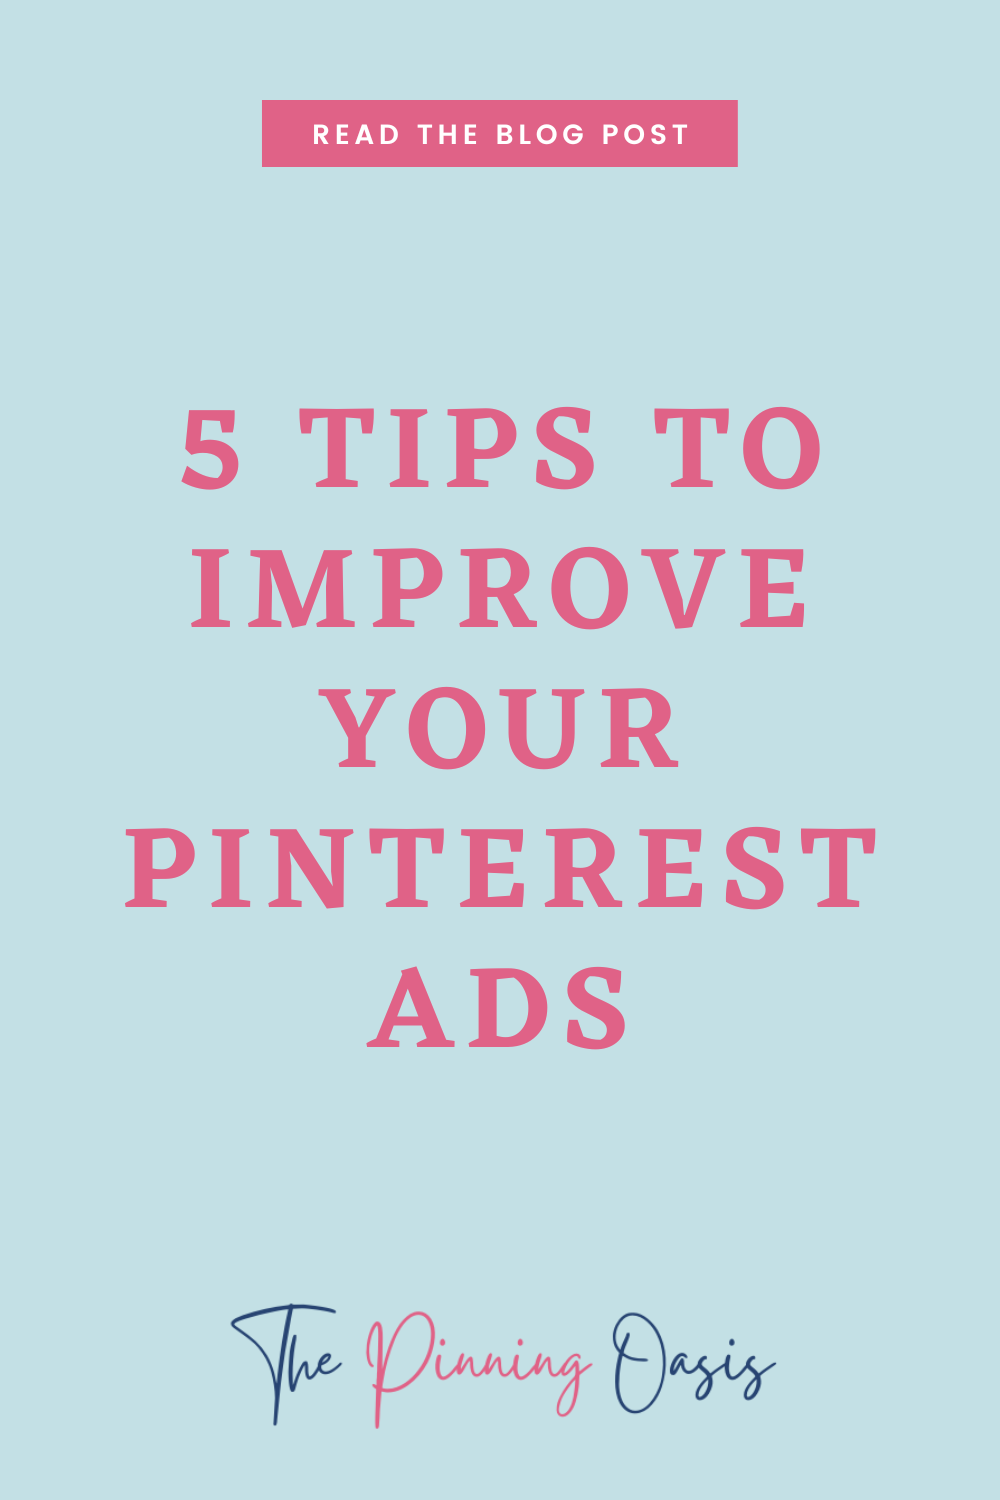 5 Tips to Improve Your Pinterest Ads – The Pinning Oasis